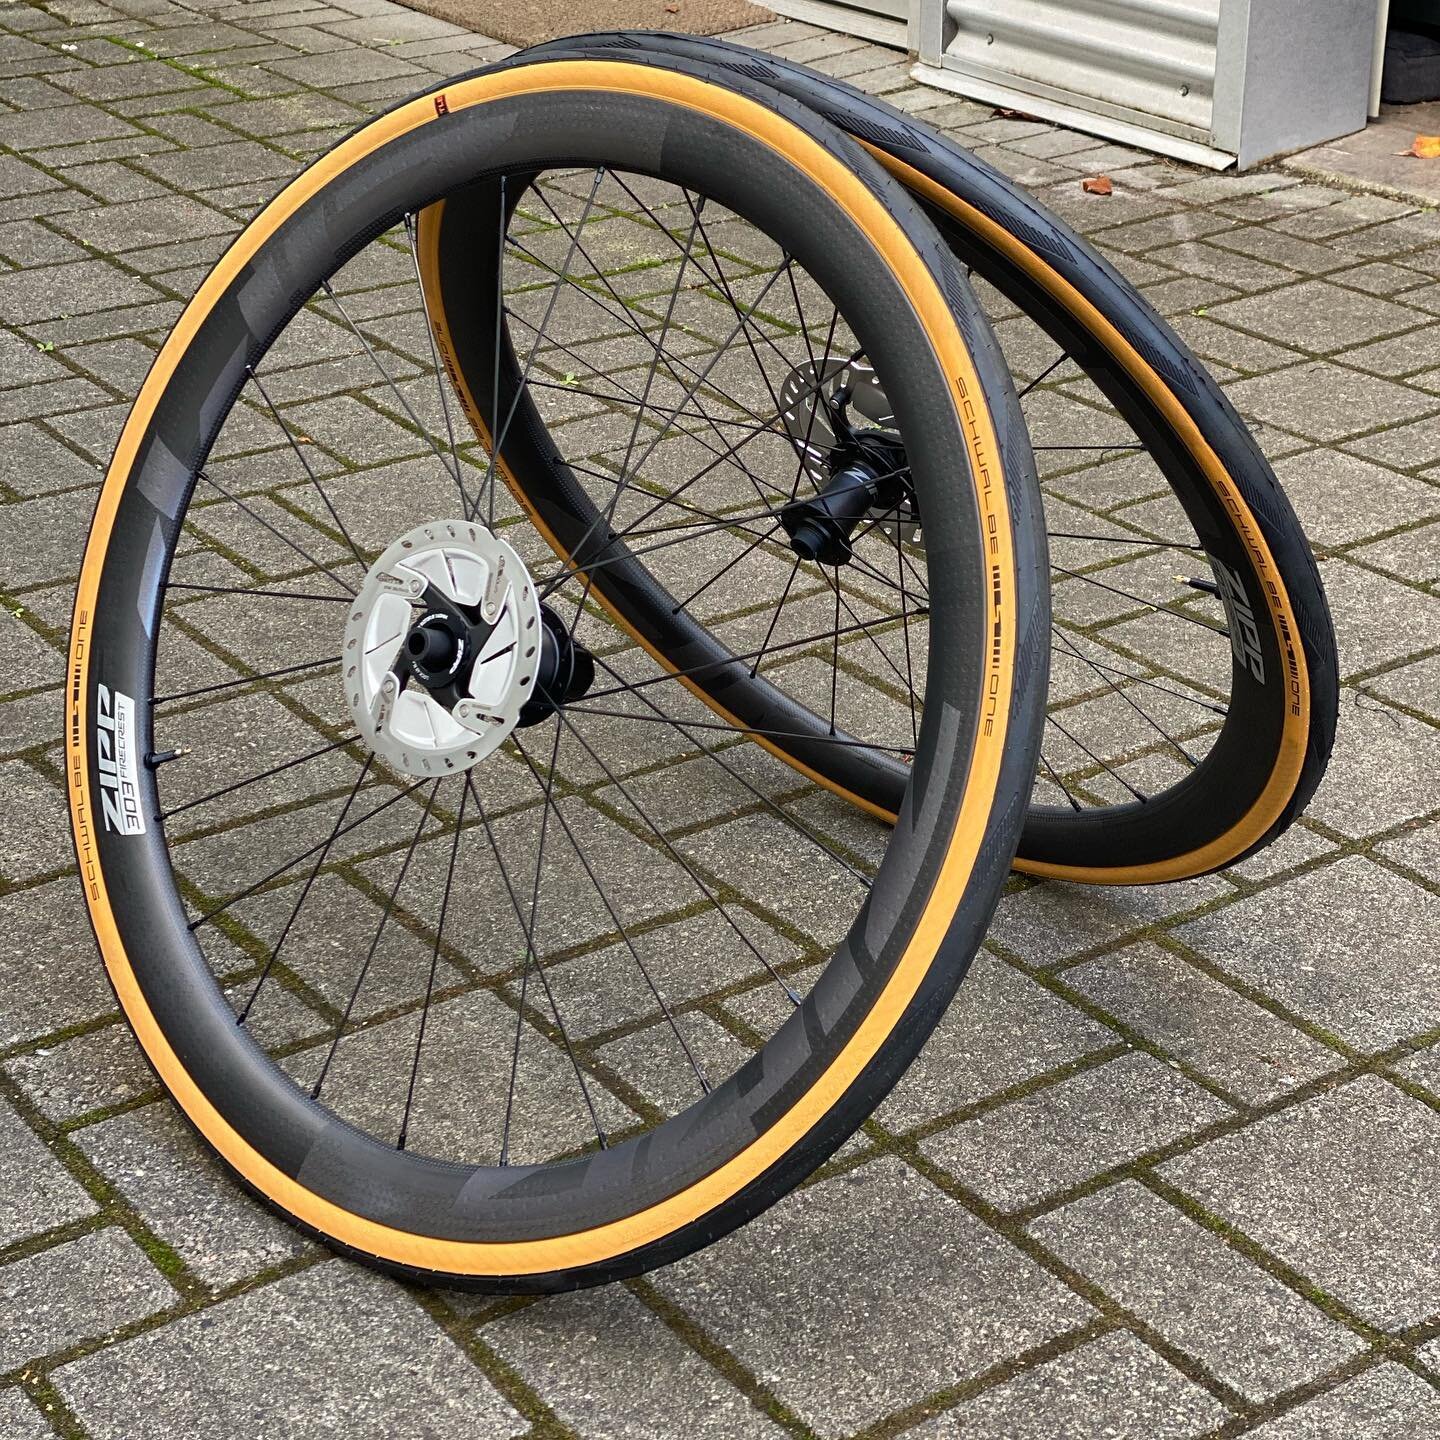 These new @zippspeed 303 Firecrest wheels came out straight fire 🔥, right? Interested in a new groupset, wheelset, power meter, or bike for 2021? Availability is super slim right now, and it looks like that will continue well into next year. We&rsqu